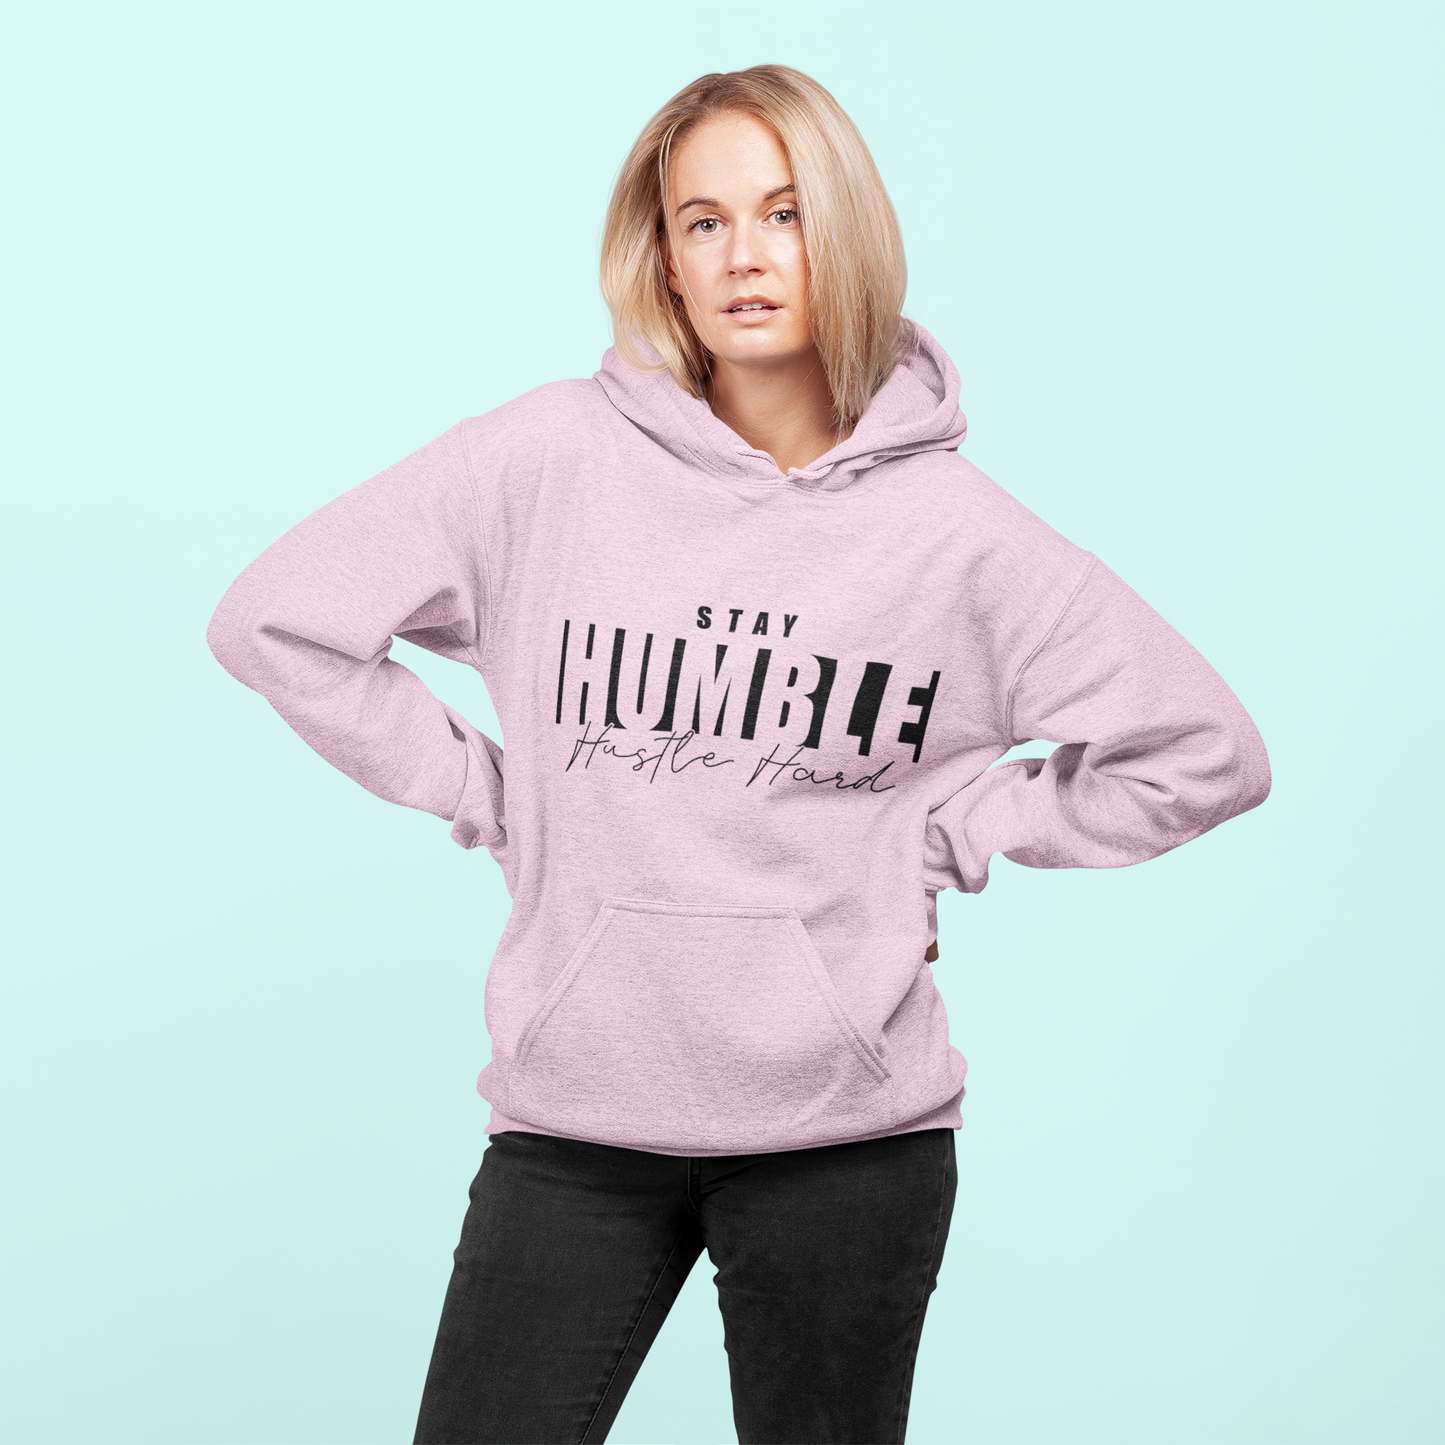 Stay Humble Hustle Hard Hoodie - Light Pink / S - Sport Finesse